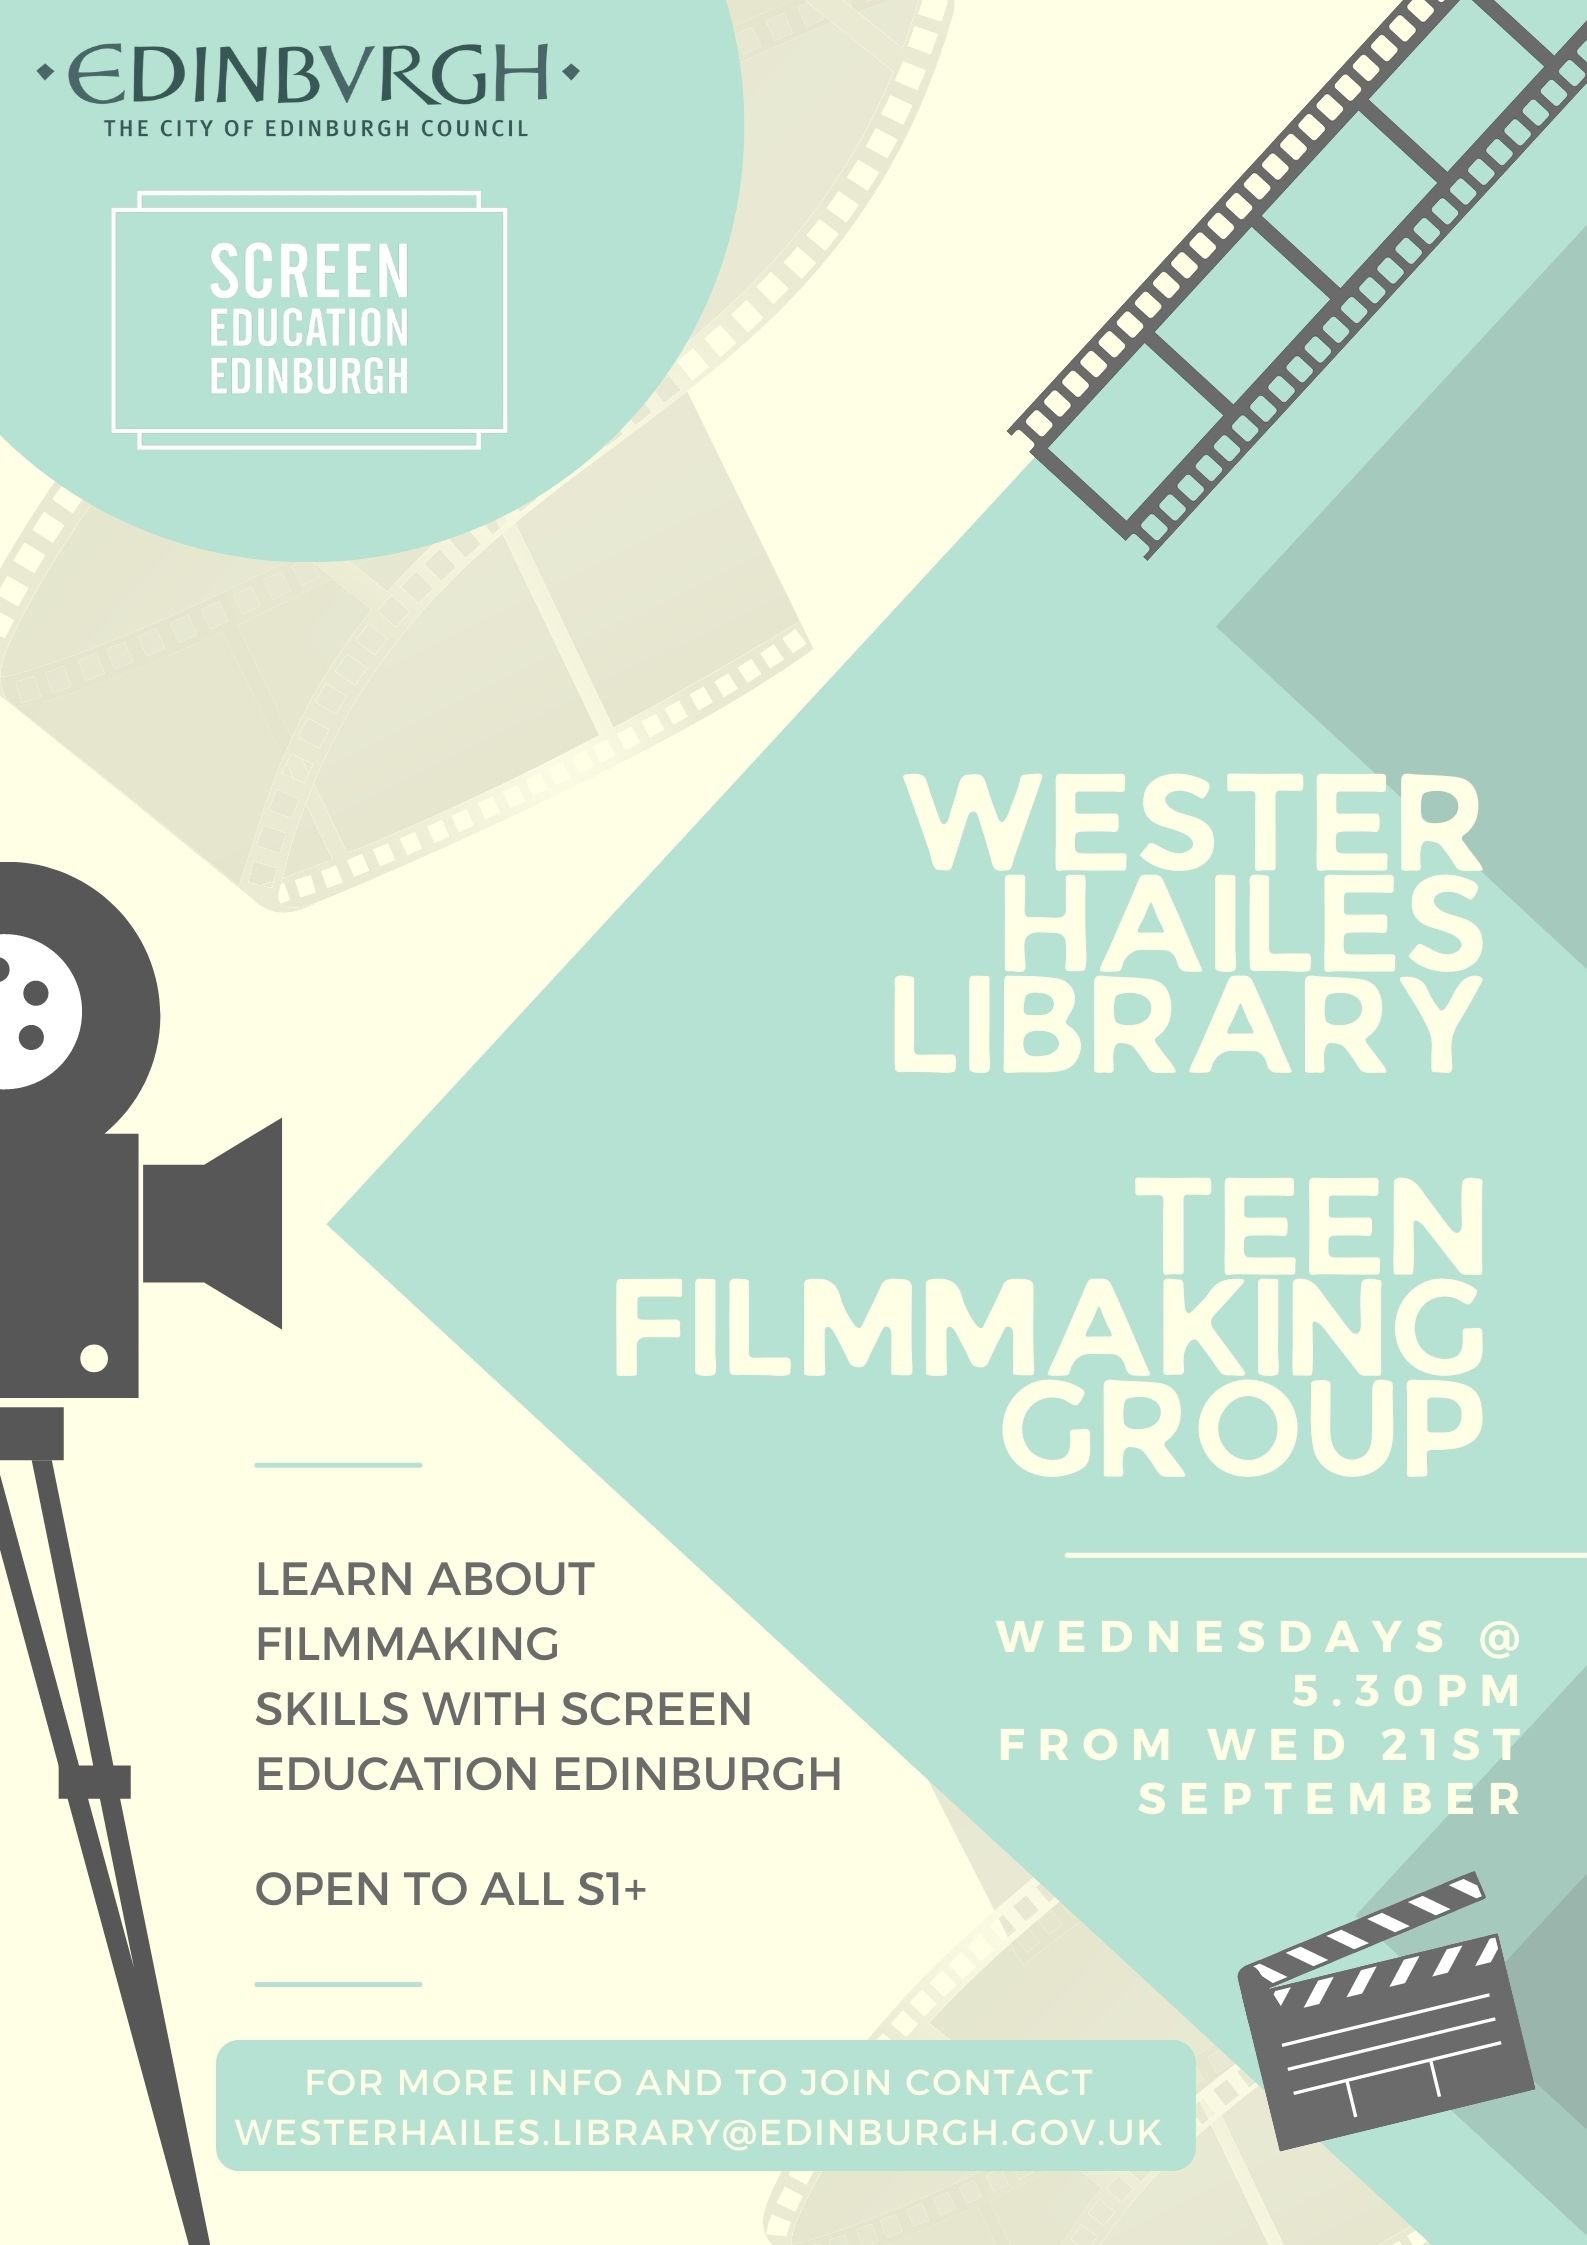 Wester Hailes Library Filmmaking Group Featured Image